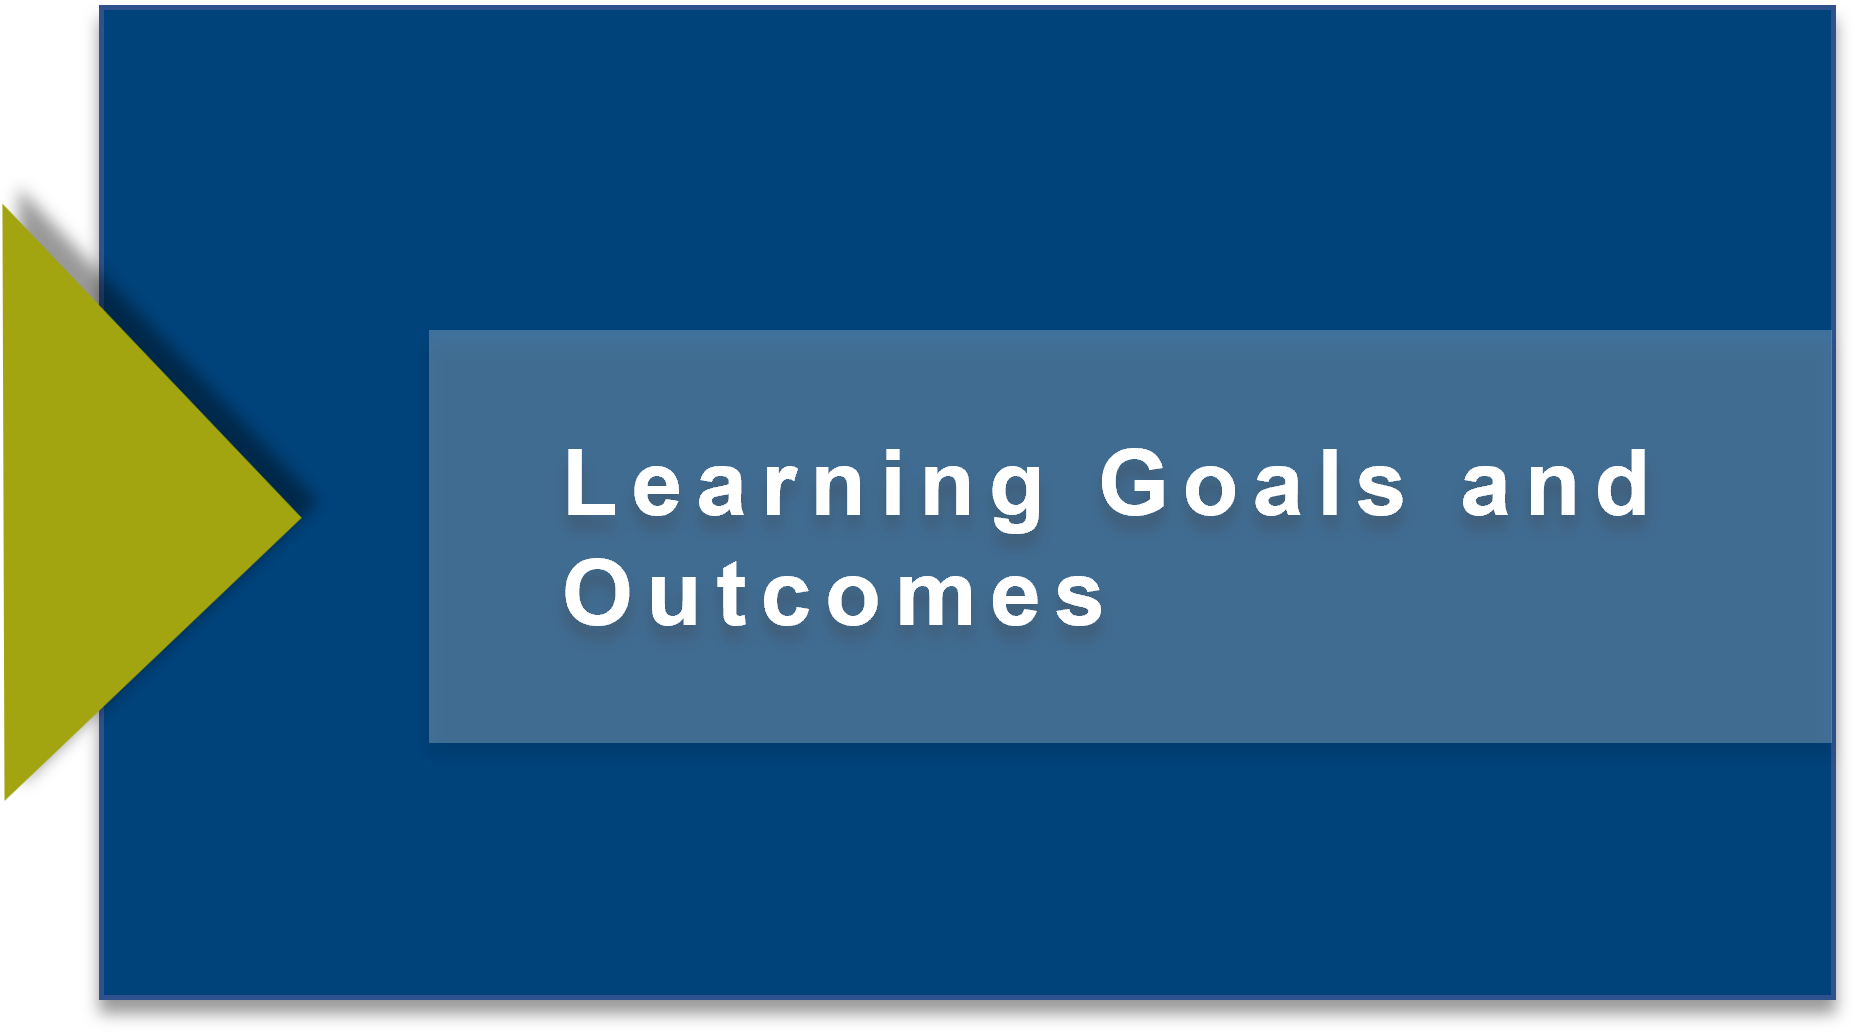 Learning Goals and Outcomes